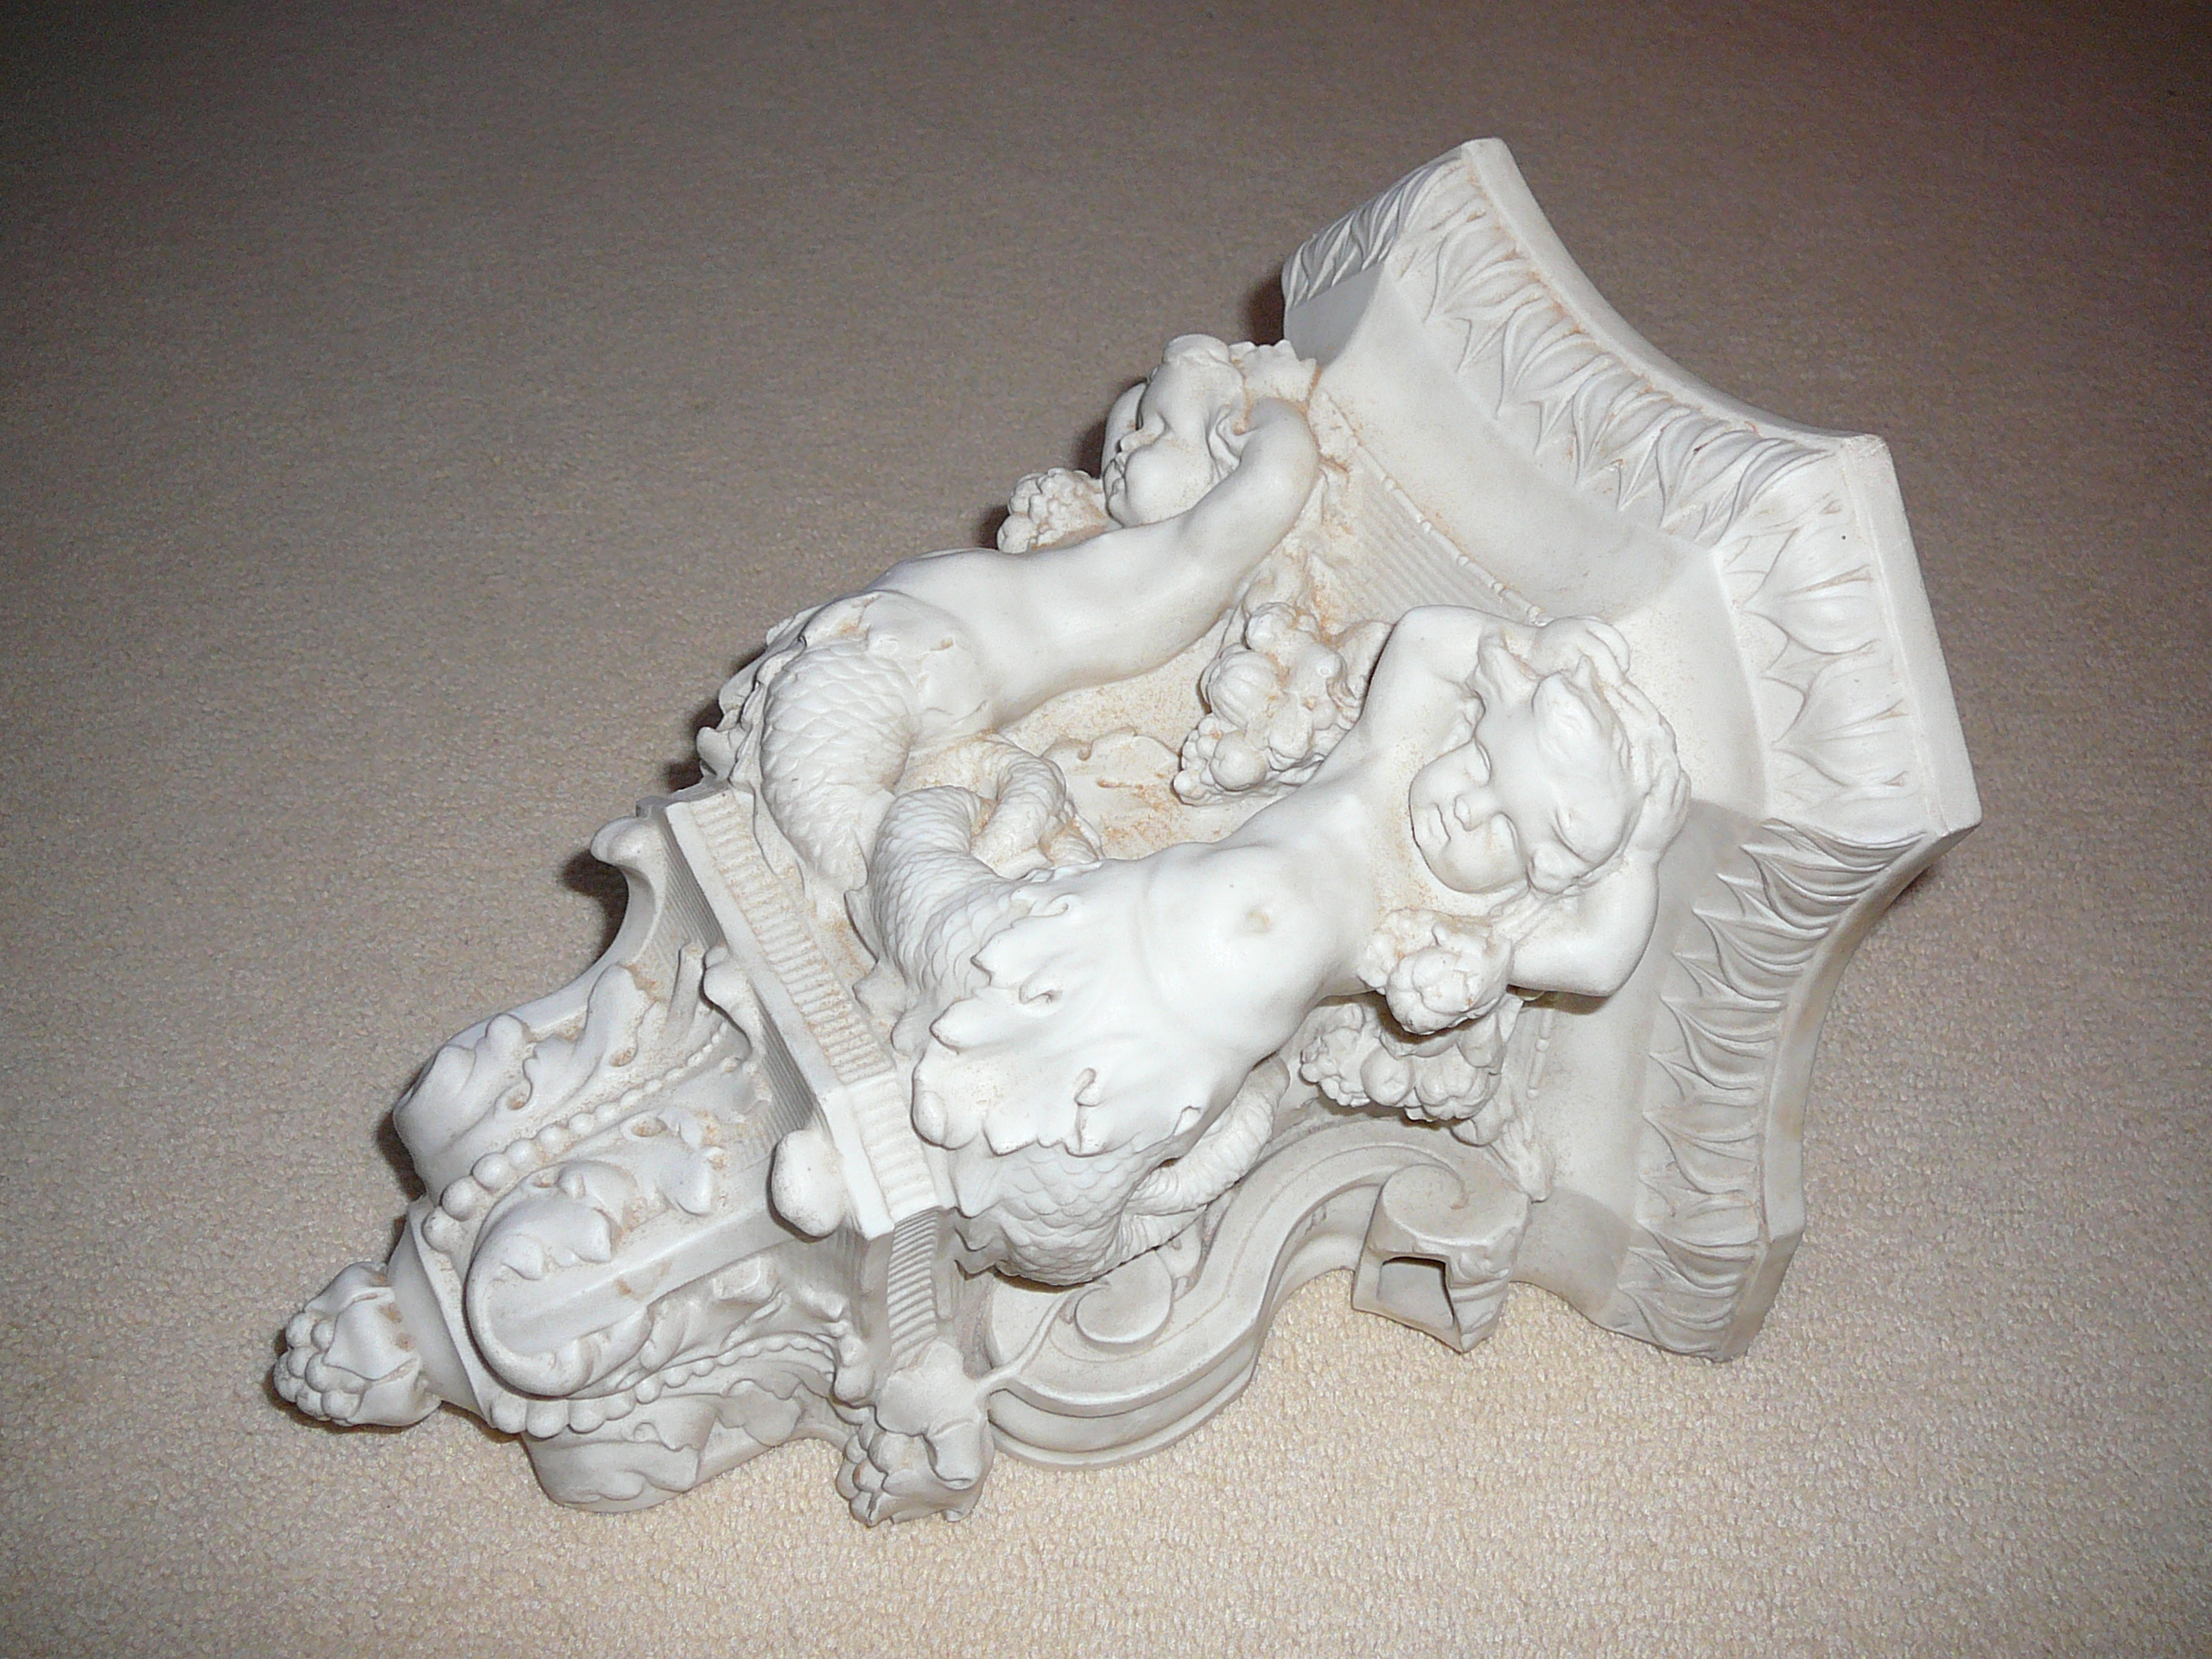 Copeland Parian decorative wall bracket with minor inobtrusive damage to one side. - Image 4 of 6